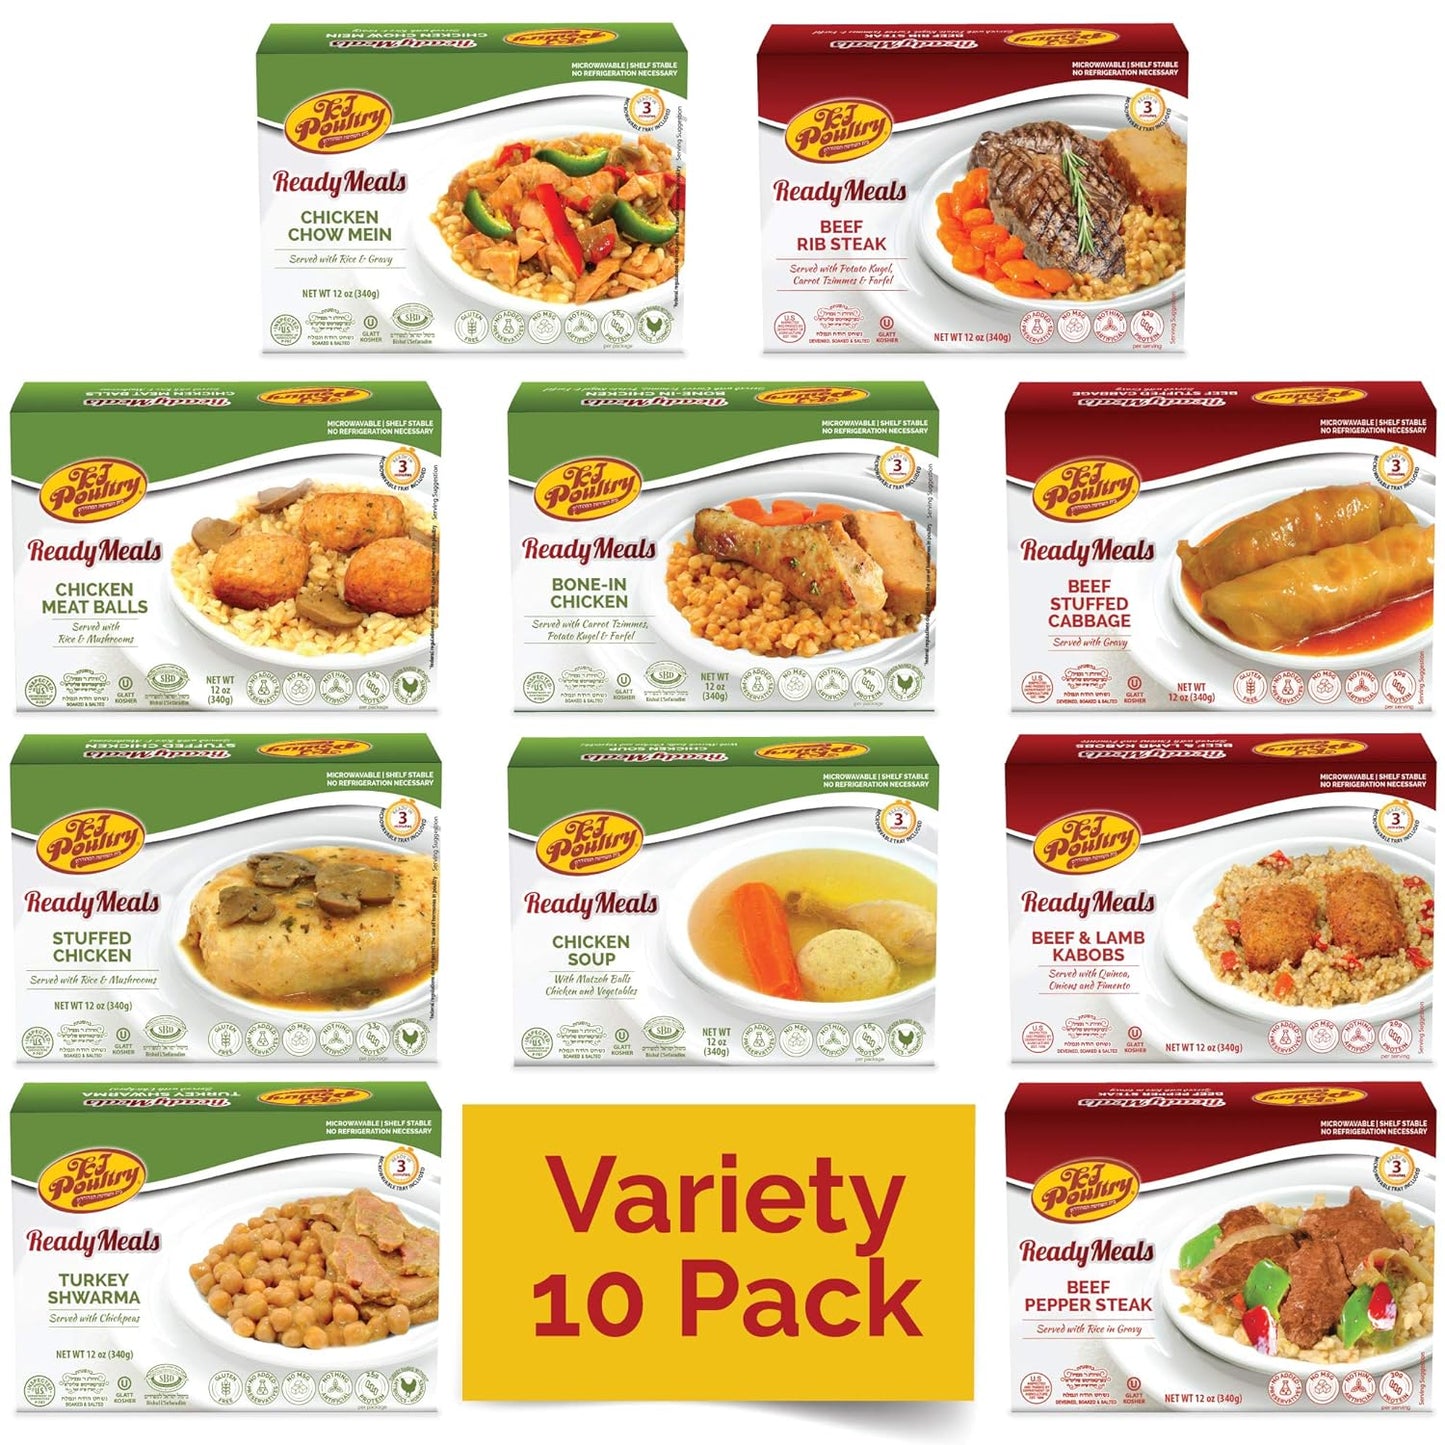 Kosher MRE Meat Meals Ready to Eat (10 Pack Variety - Beef, Chicken & Turkey) Prepared Entree Fully Cooked, Shelf Stable Microwave Dinner - Travel, Military, Camping, Emergency Survival Protein Food